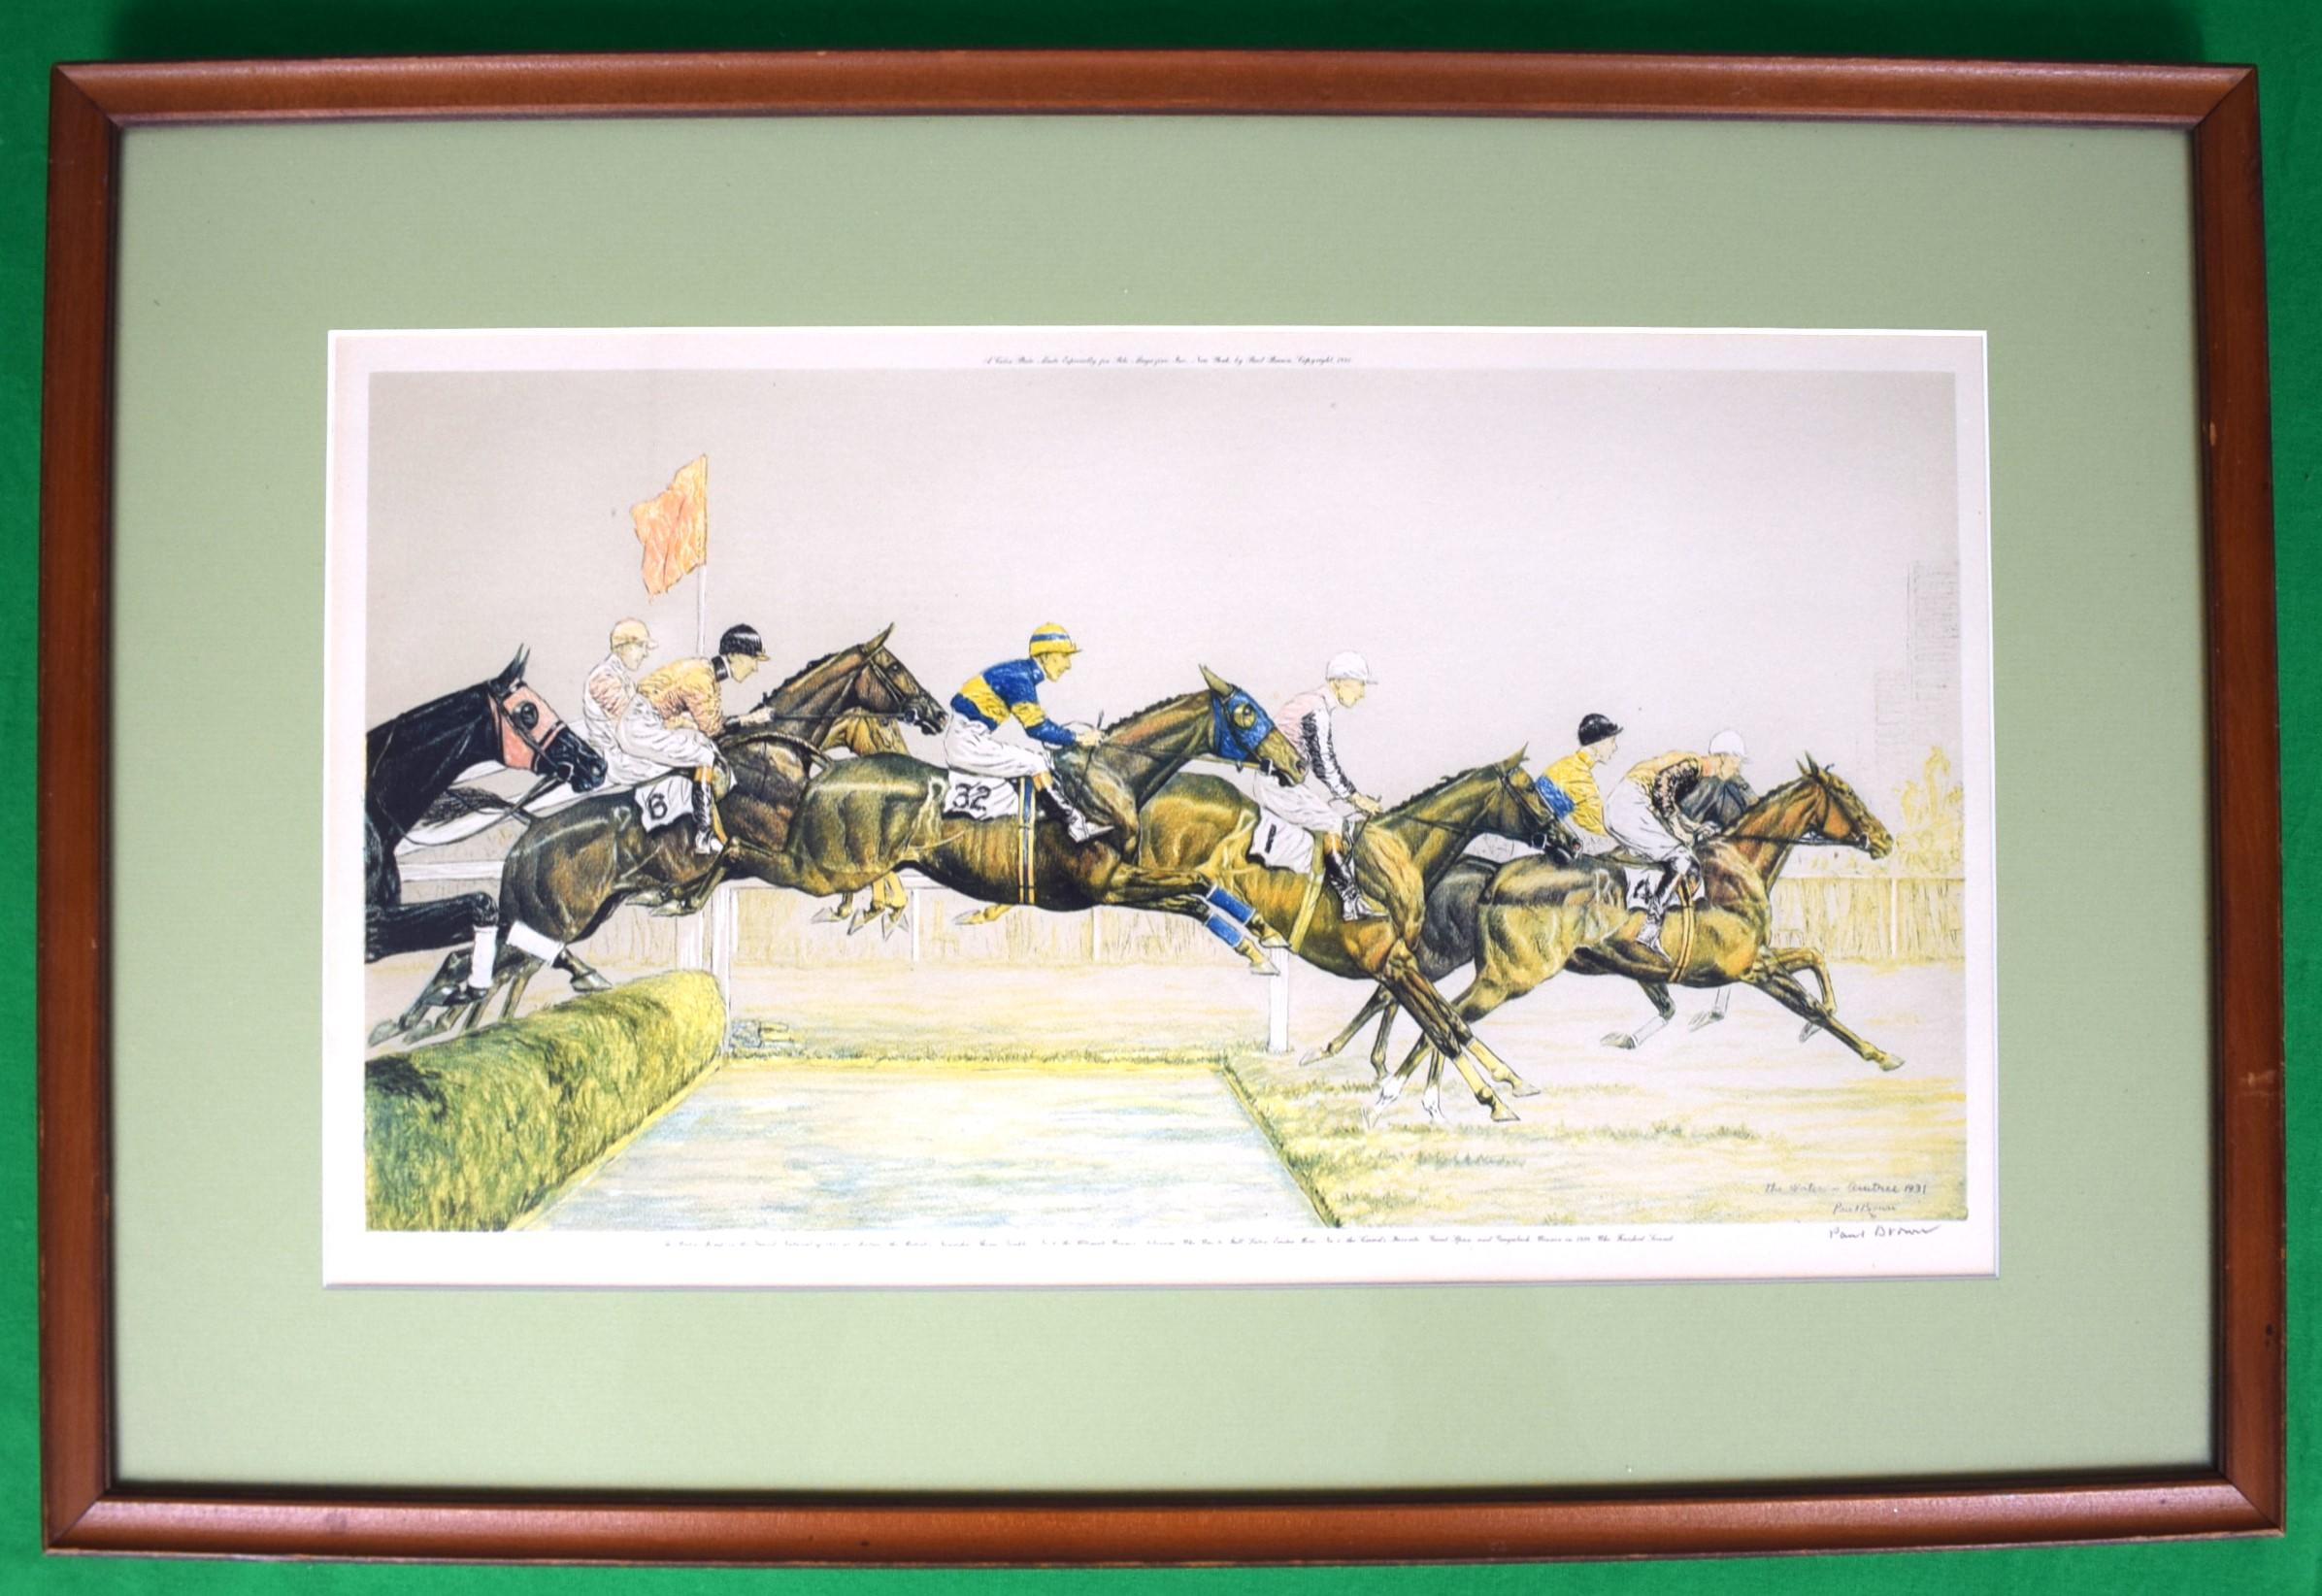 "The Water Jump In The Grand National Of 1931 At Aintree" by Paul Brown - Print by Paul Desmond Brown